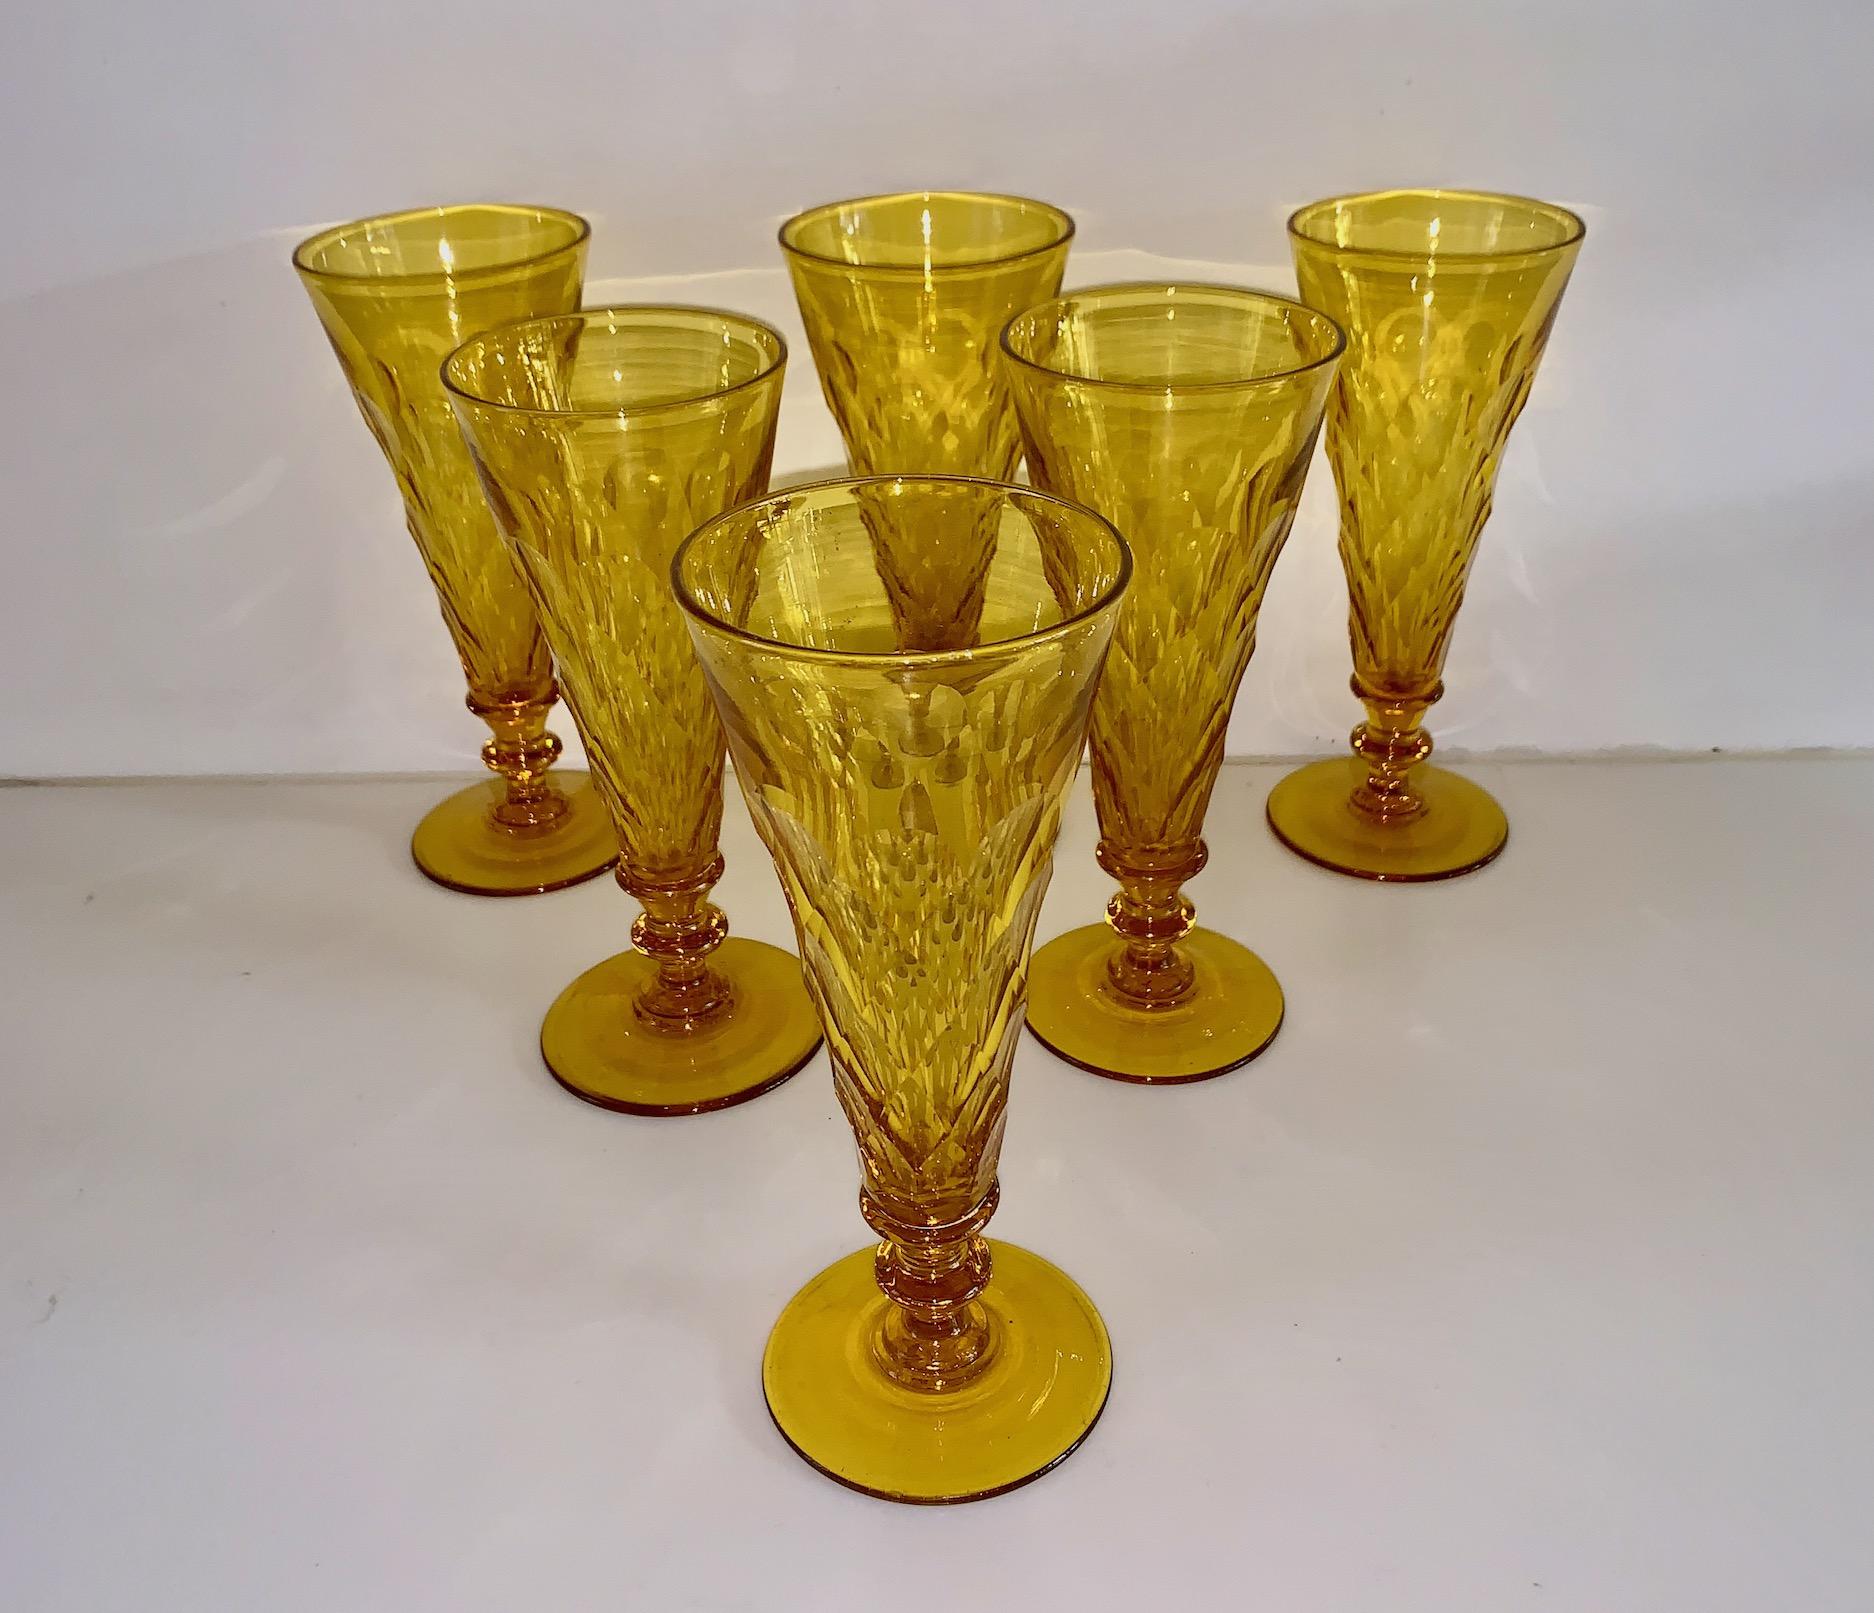 This is a rare and beautiful set of of six champagne flutes in an almost Canary Yellow color and are attributed to the Steuben Glass Company.Steuben Glass was started in England in the early part of the 20th C. and a few years shortly there after